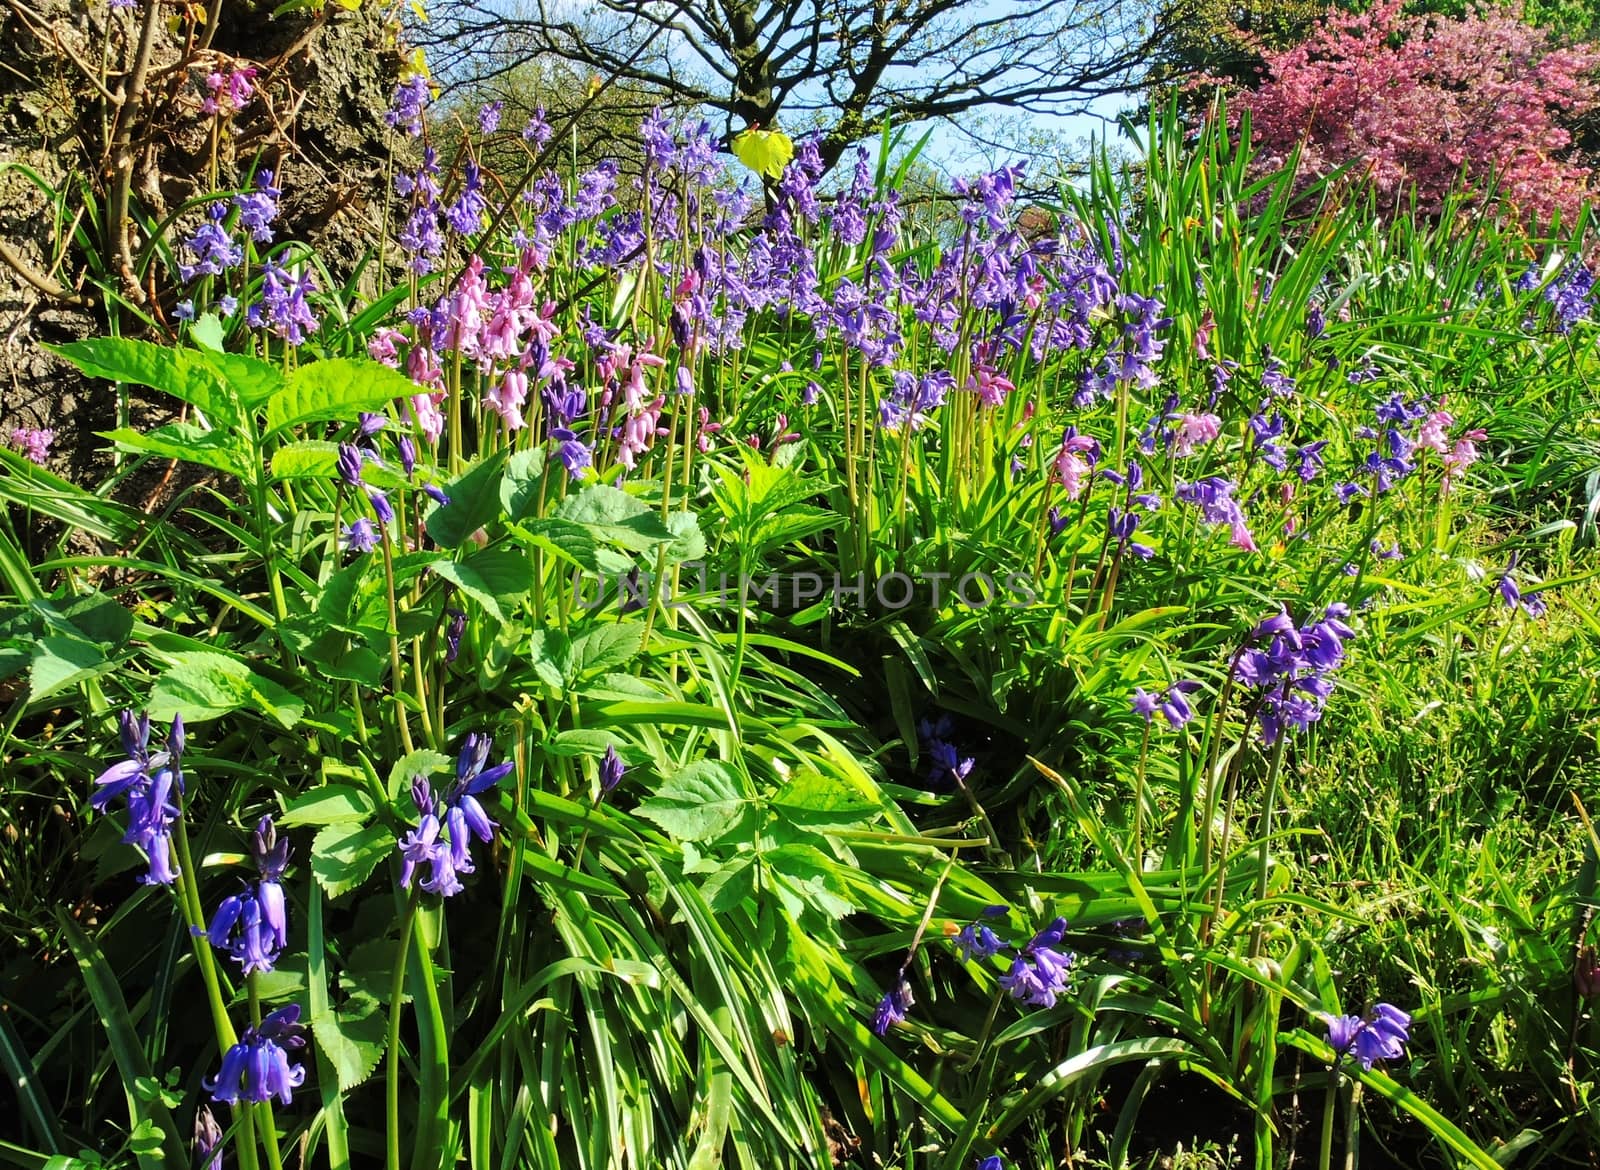 A colourful image of Spring flowering Bluebells.